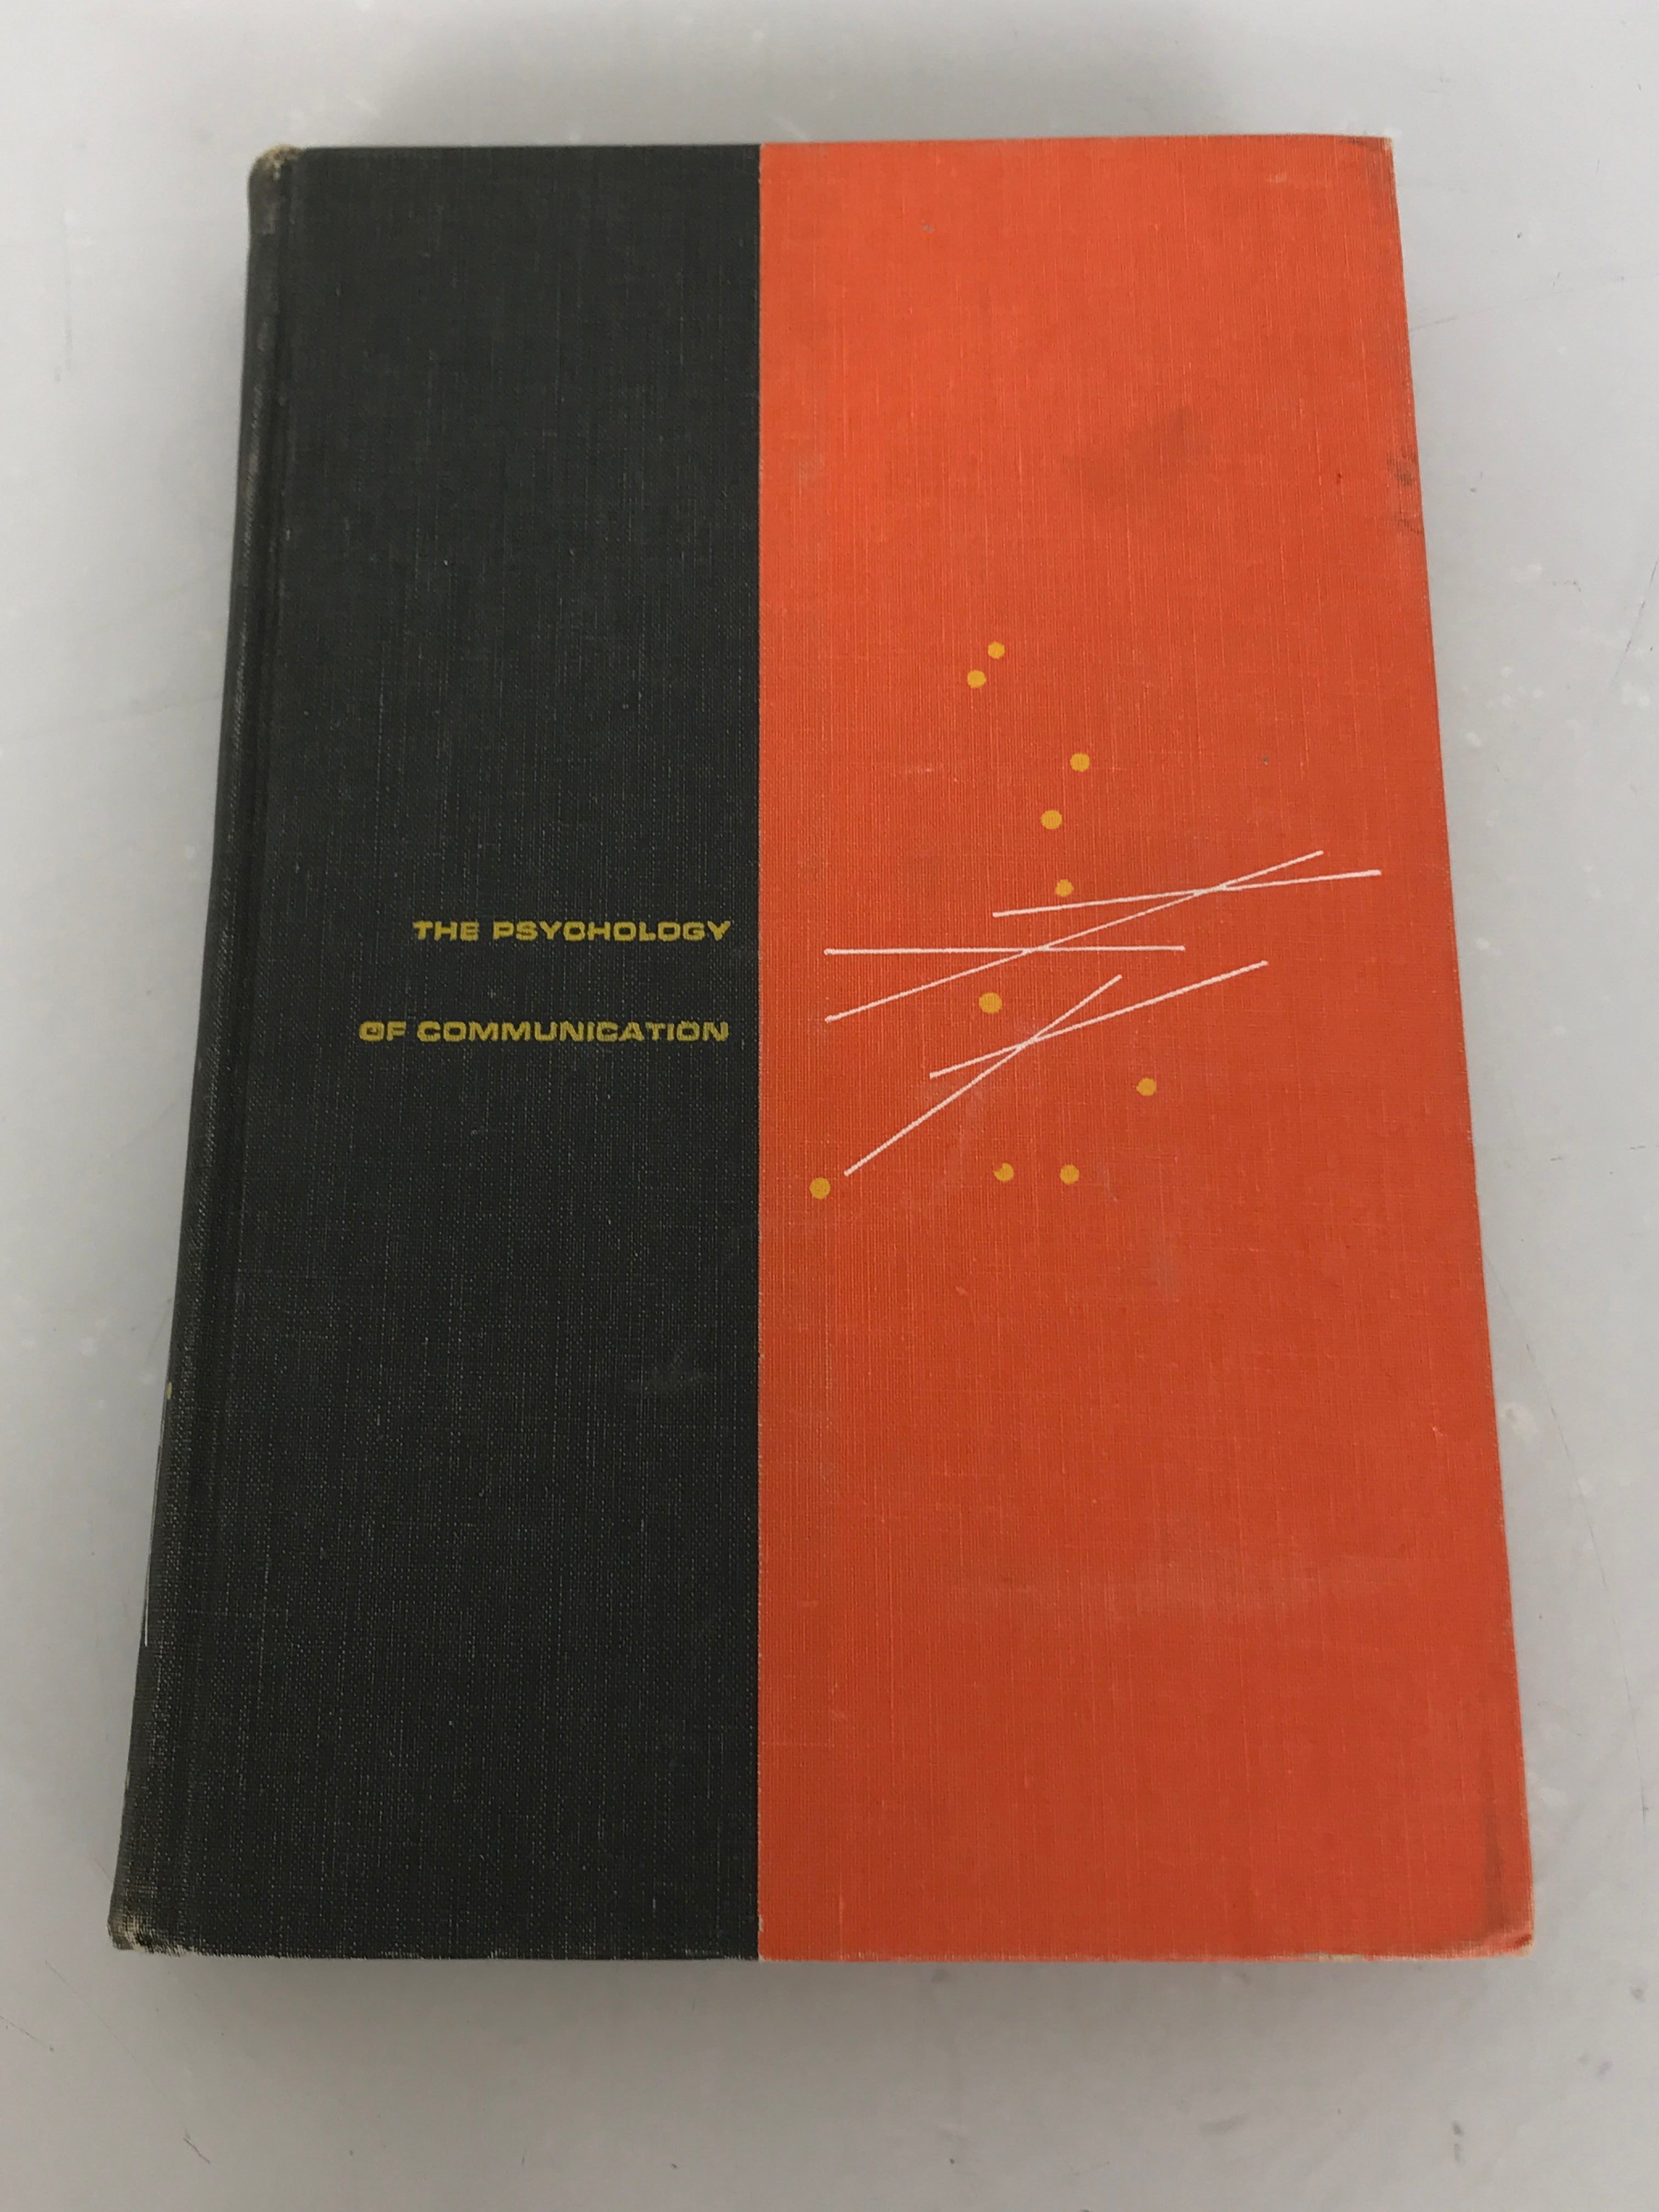 The Psychology of Communication by Eisenson, Auer, and Irwin 1963 HC